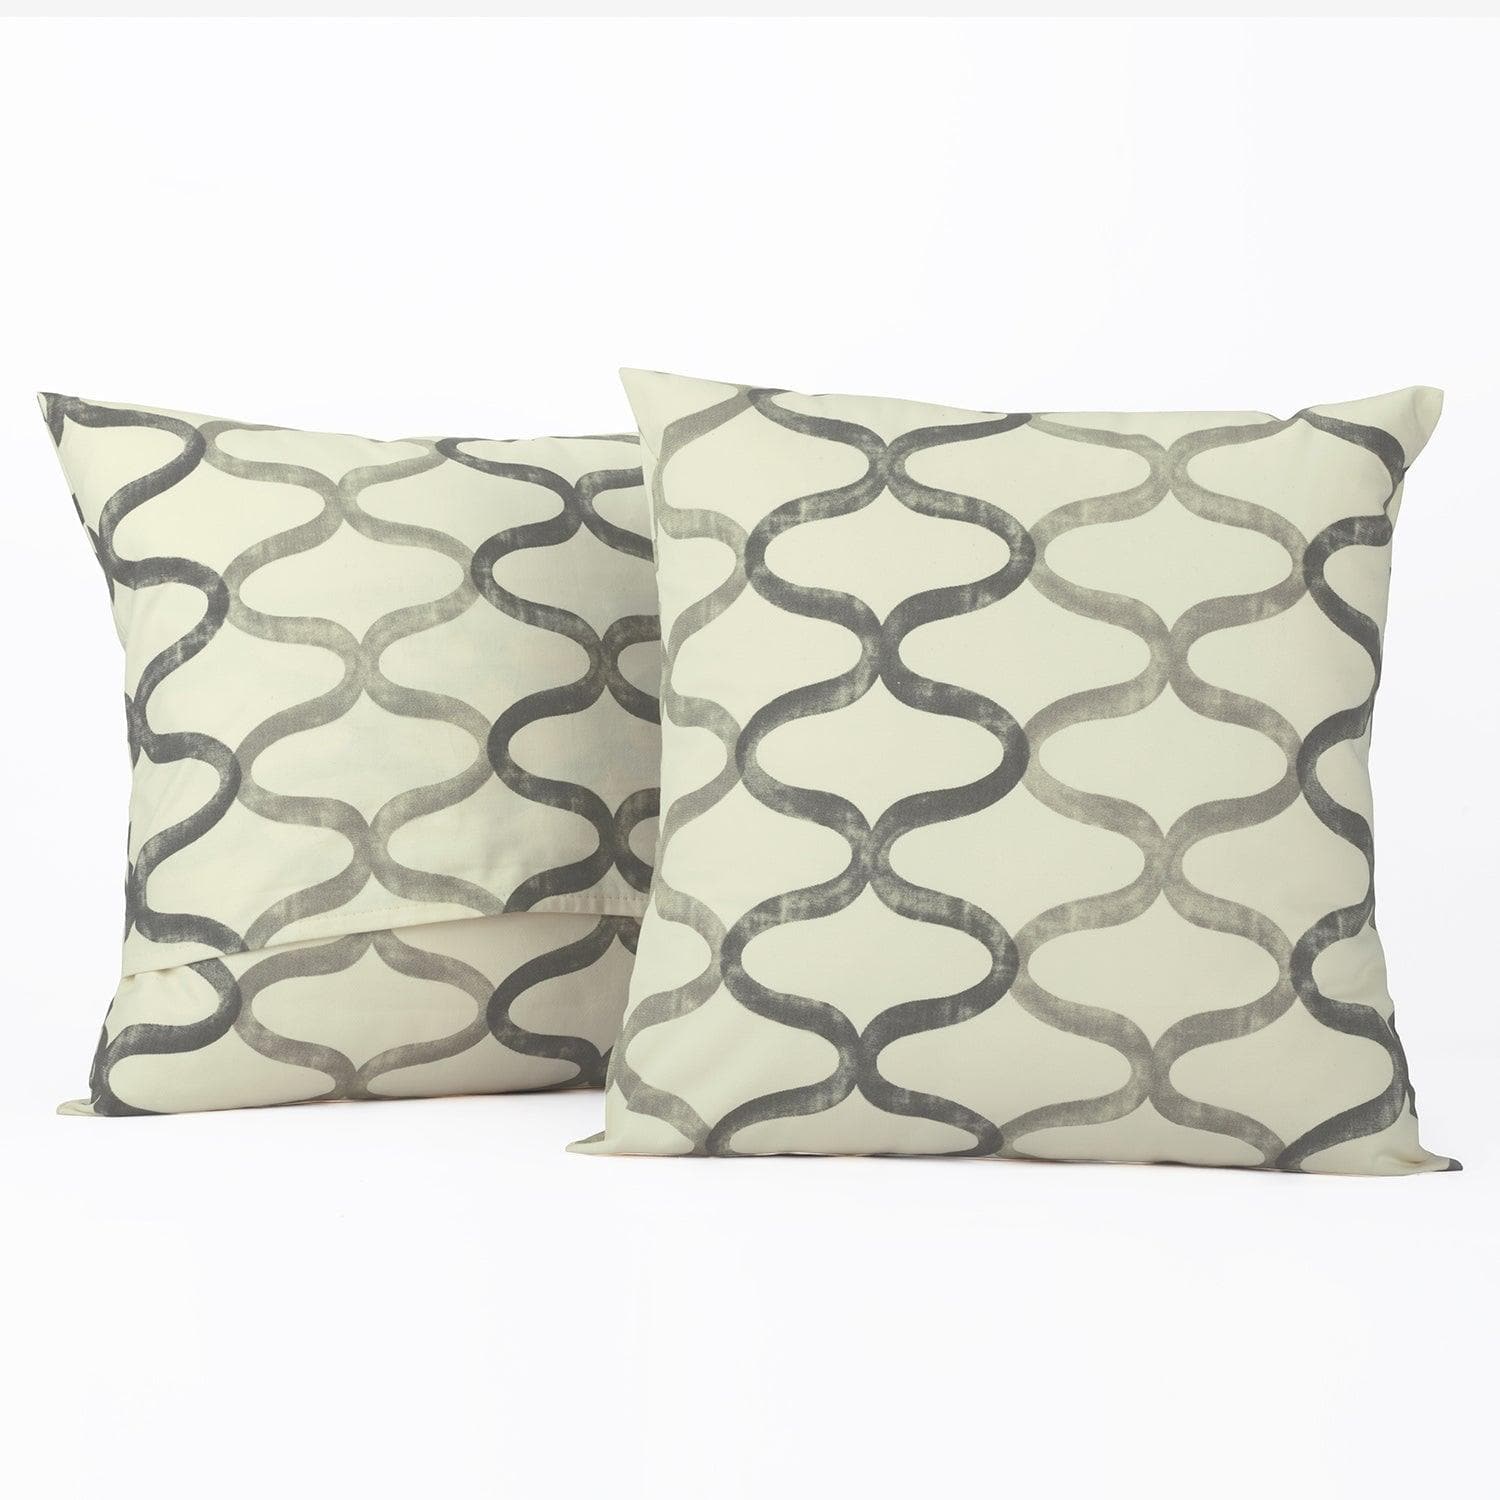 Cotton Twill Pillow Covers